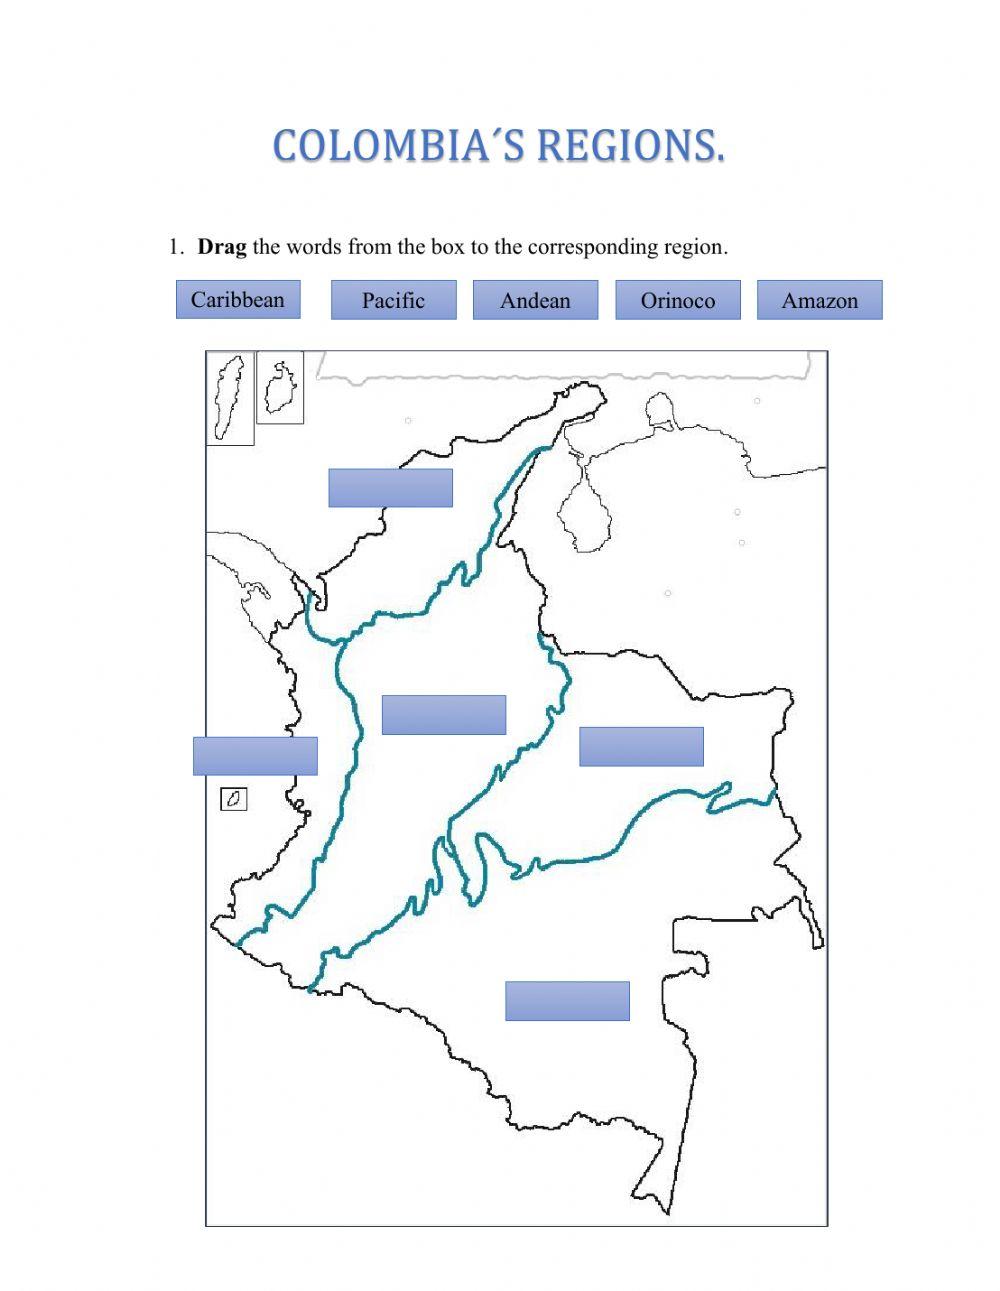 Colombia-s regions